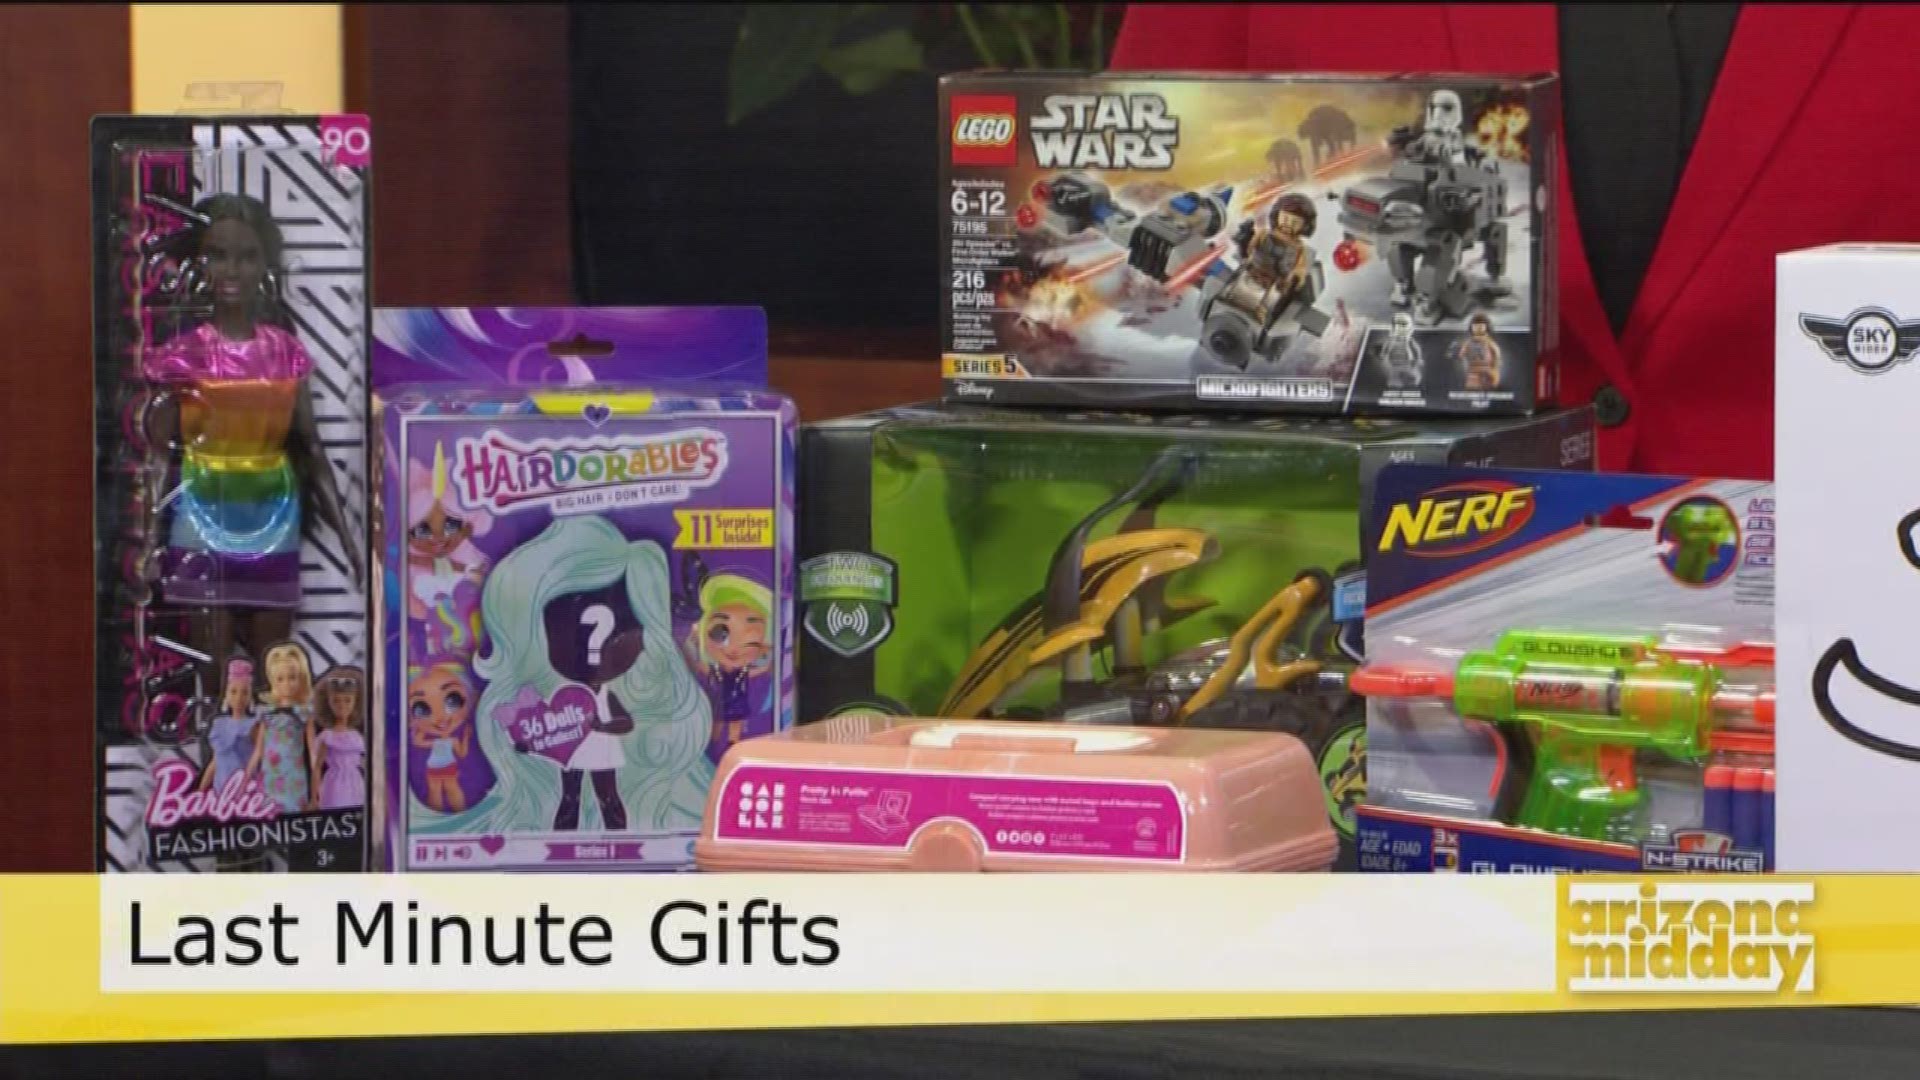 Stacie Coleman with JC Penney shares her top picks for holiday gifts from JC Penney